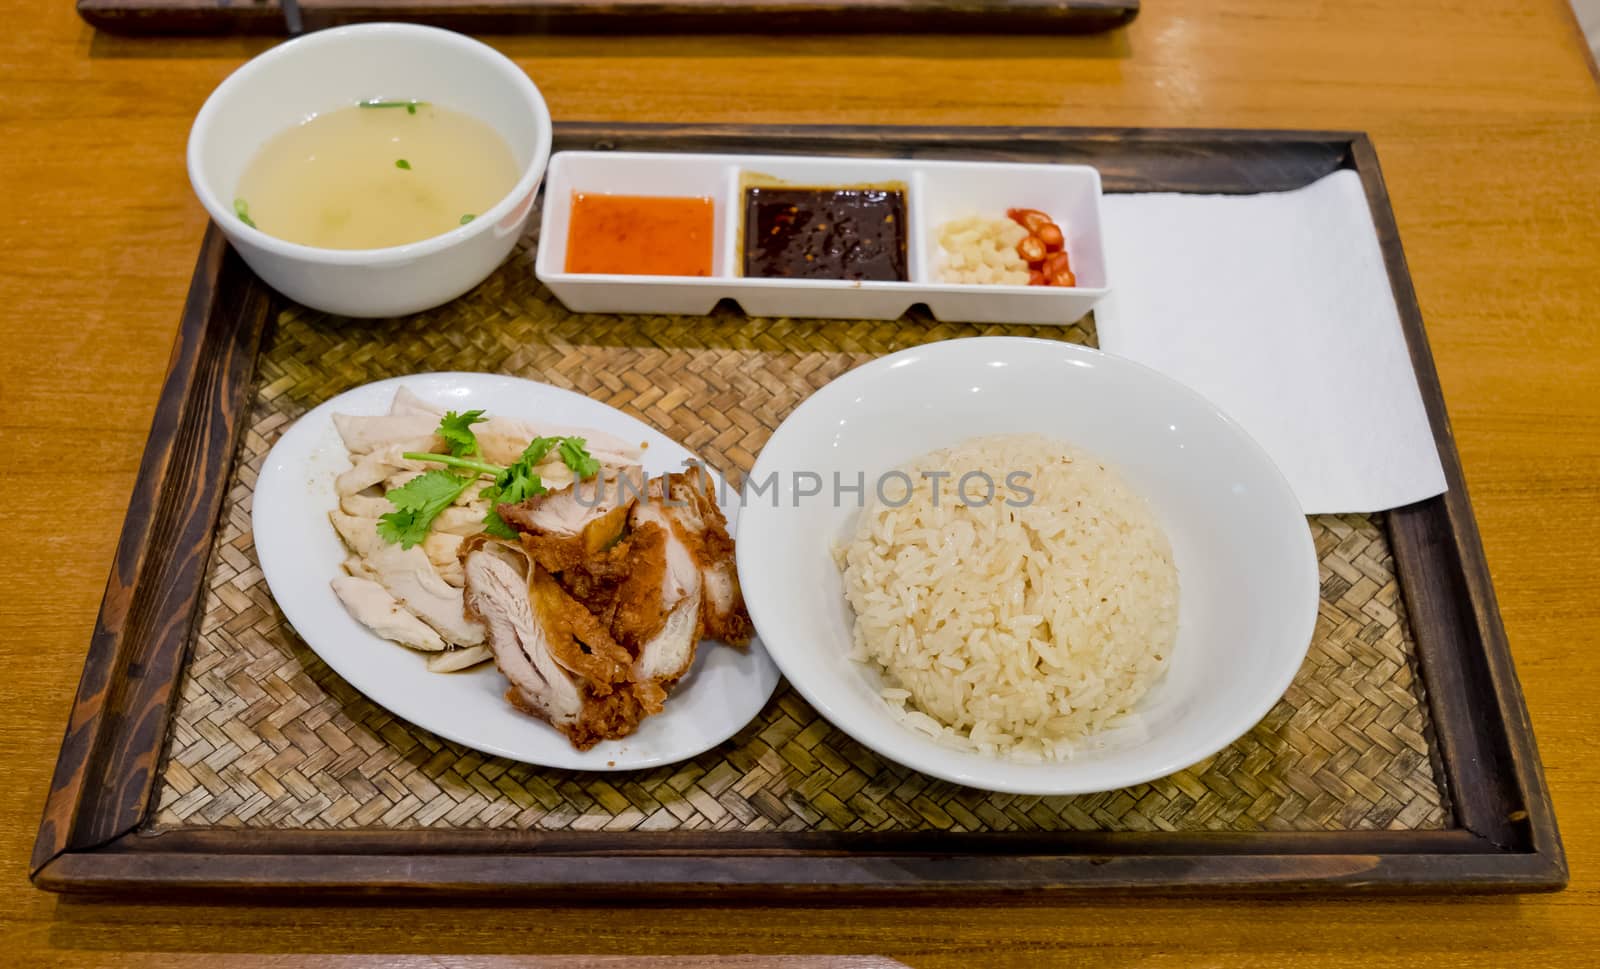 Hainanese Chicken Rice - Mixed Boil Chicken and Crisy Chicken by art9858